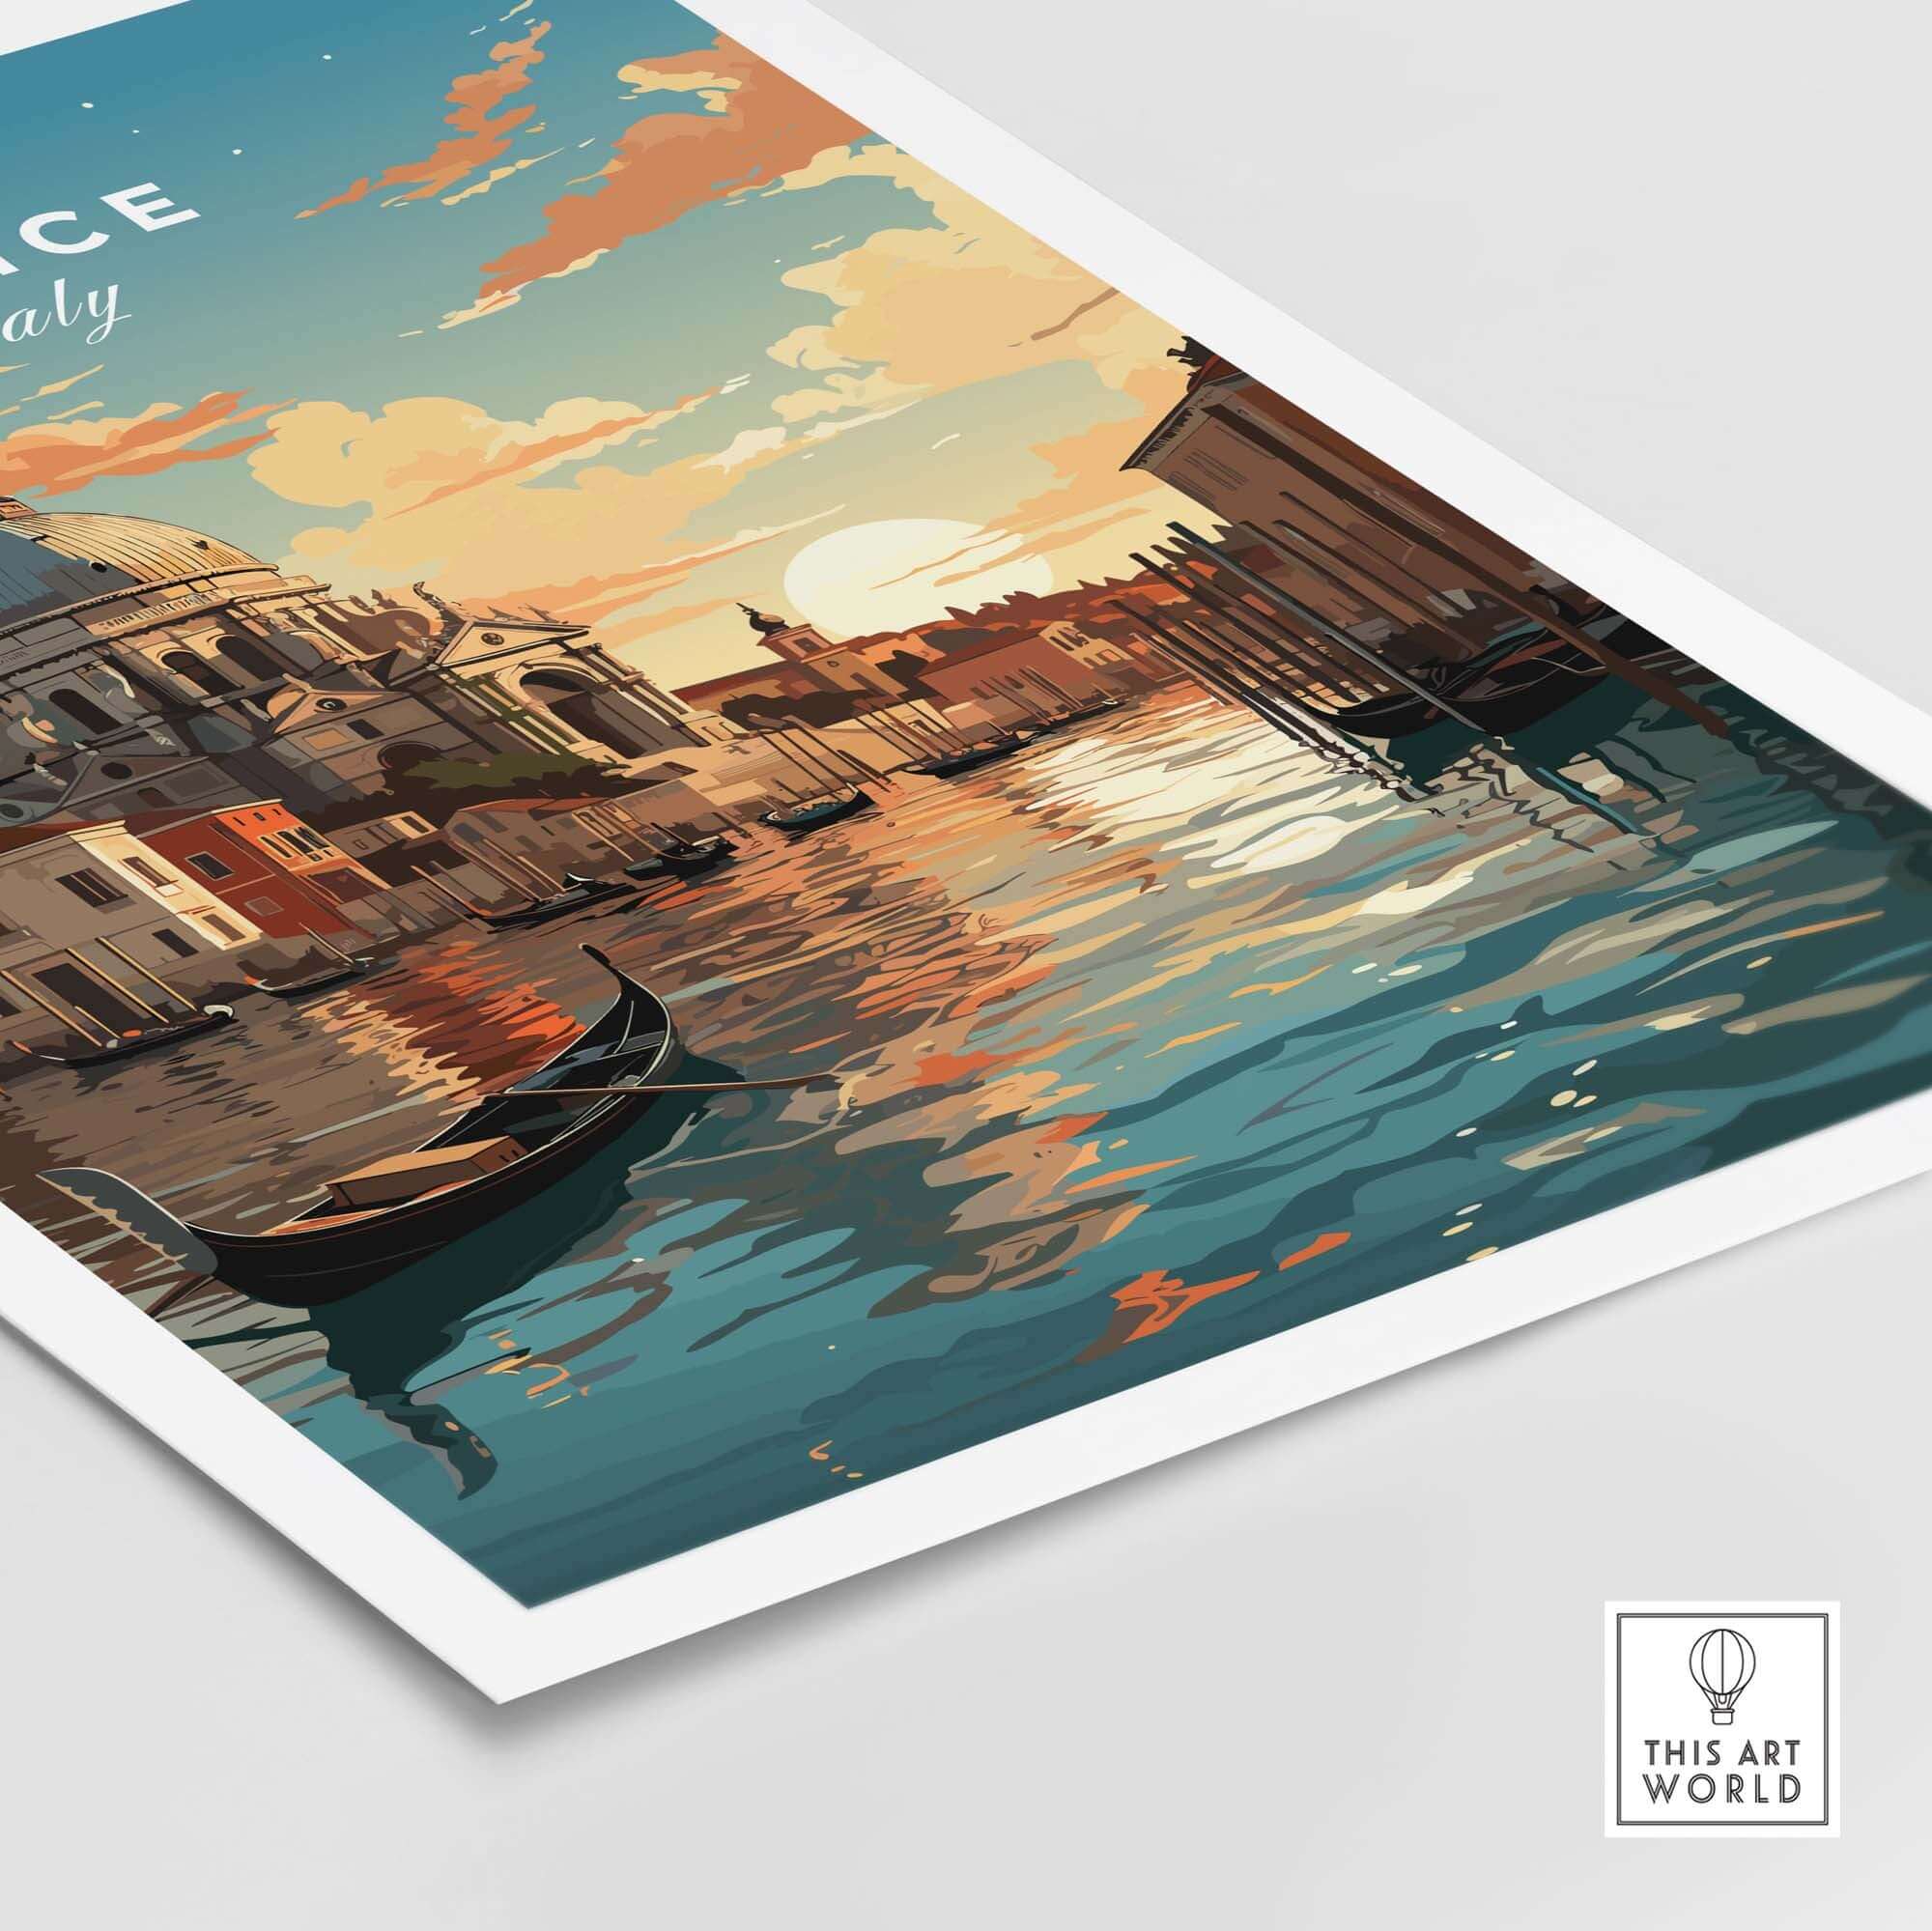 Venice Poster featuring a gondola on the Venice canals at sunset. 